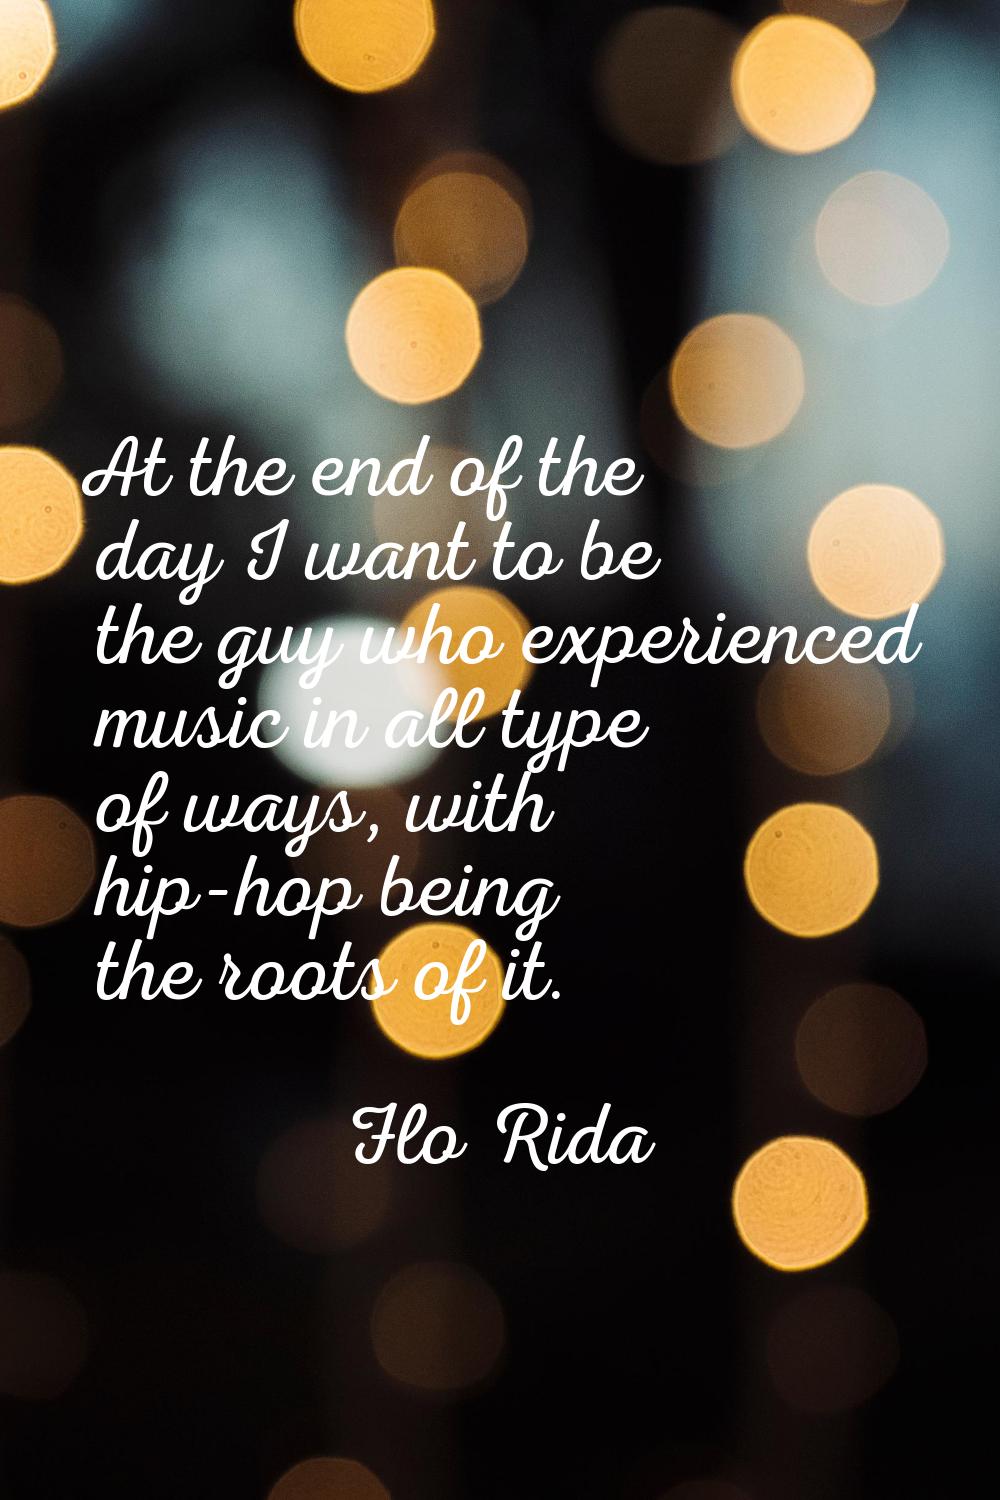 At the end of the day I want to be the guy who experienced music in all type of ways, with hip-hop 